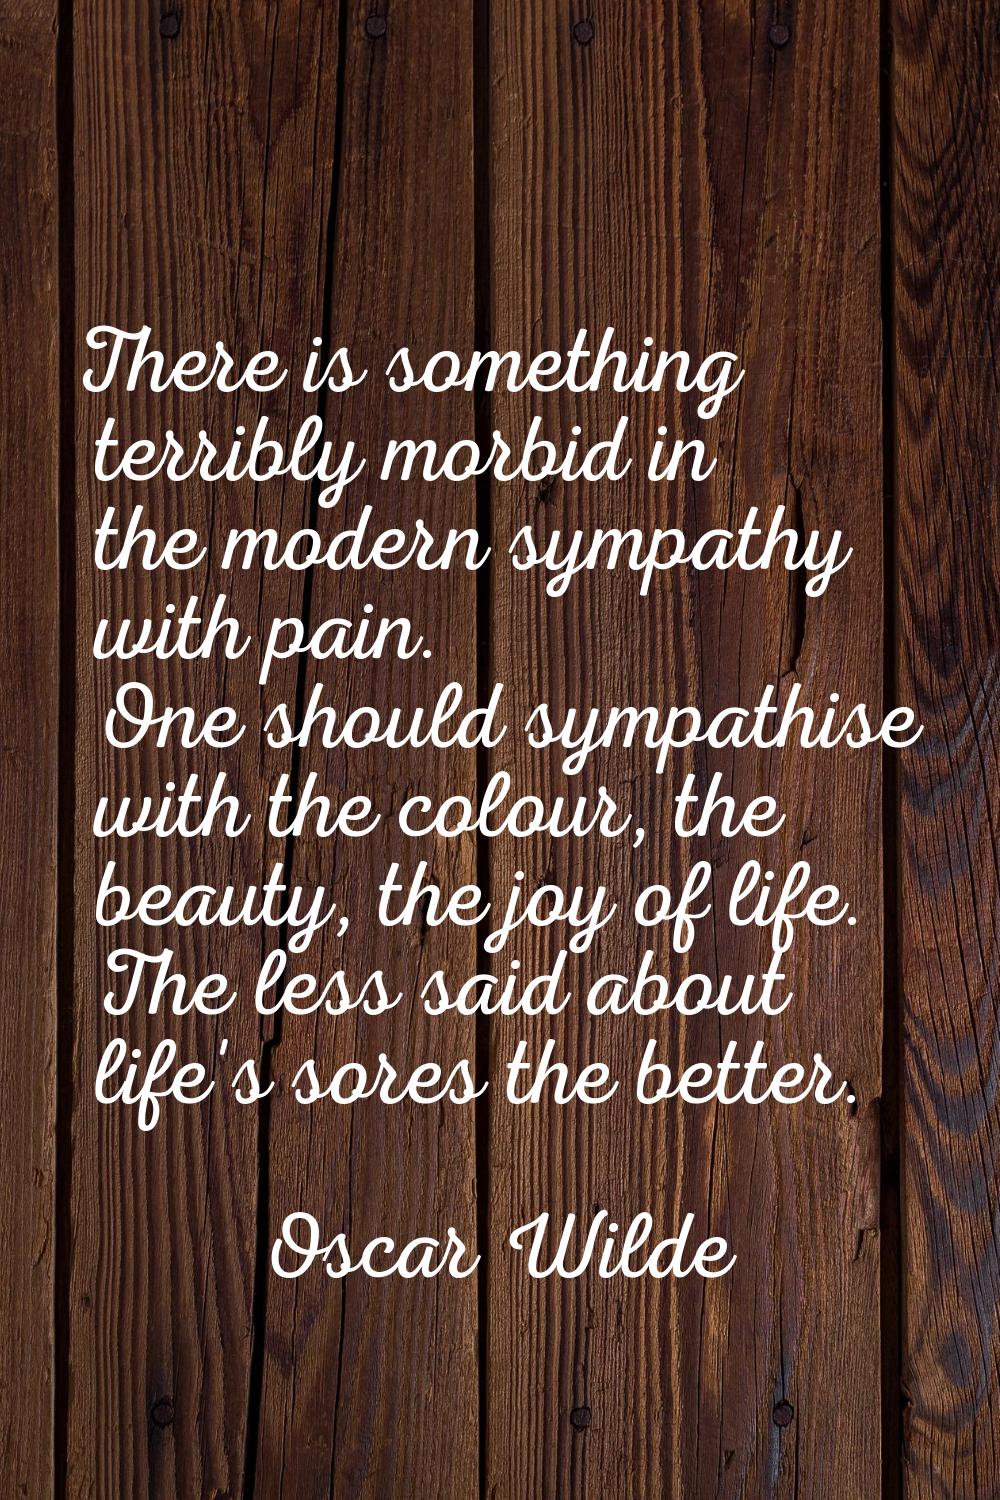 There is something terribly morbid in the modern sympathy with pain. One should sympathise with the